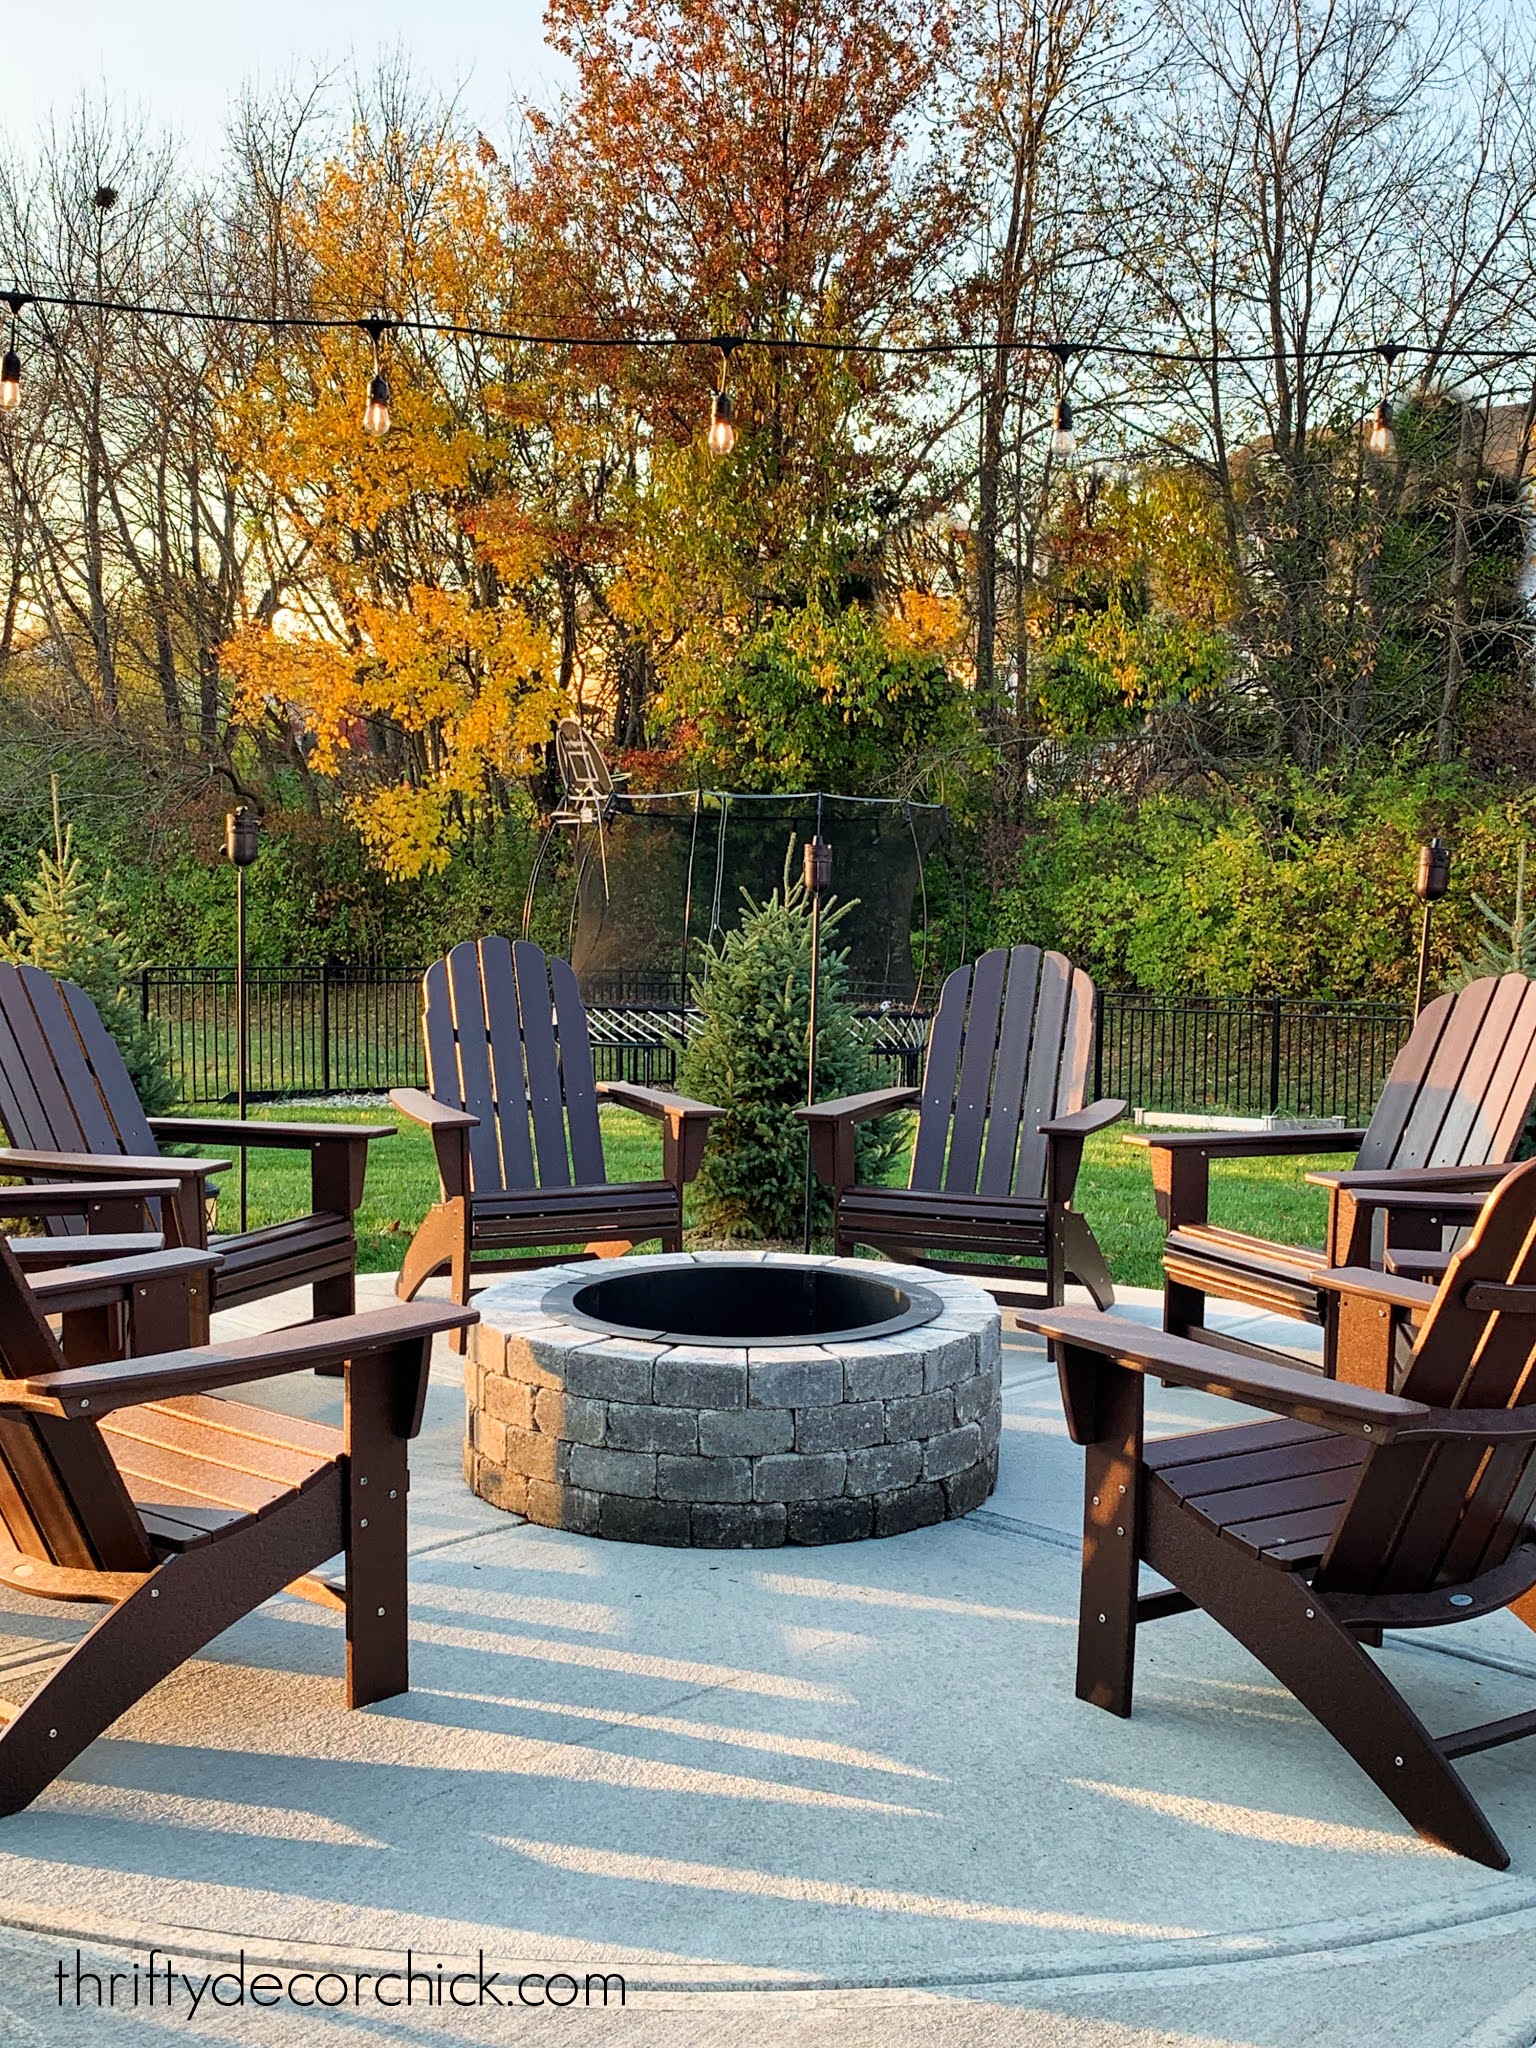 Our Cozy Round Patio Fire Pit With New, Adirondack Chairs Around Fire Pit